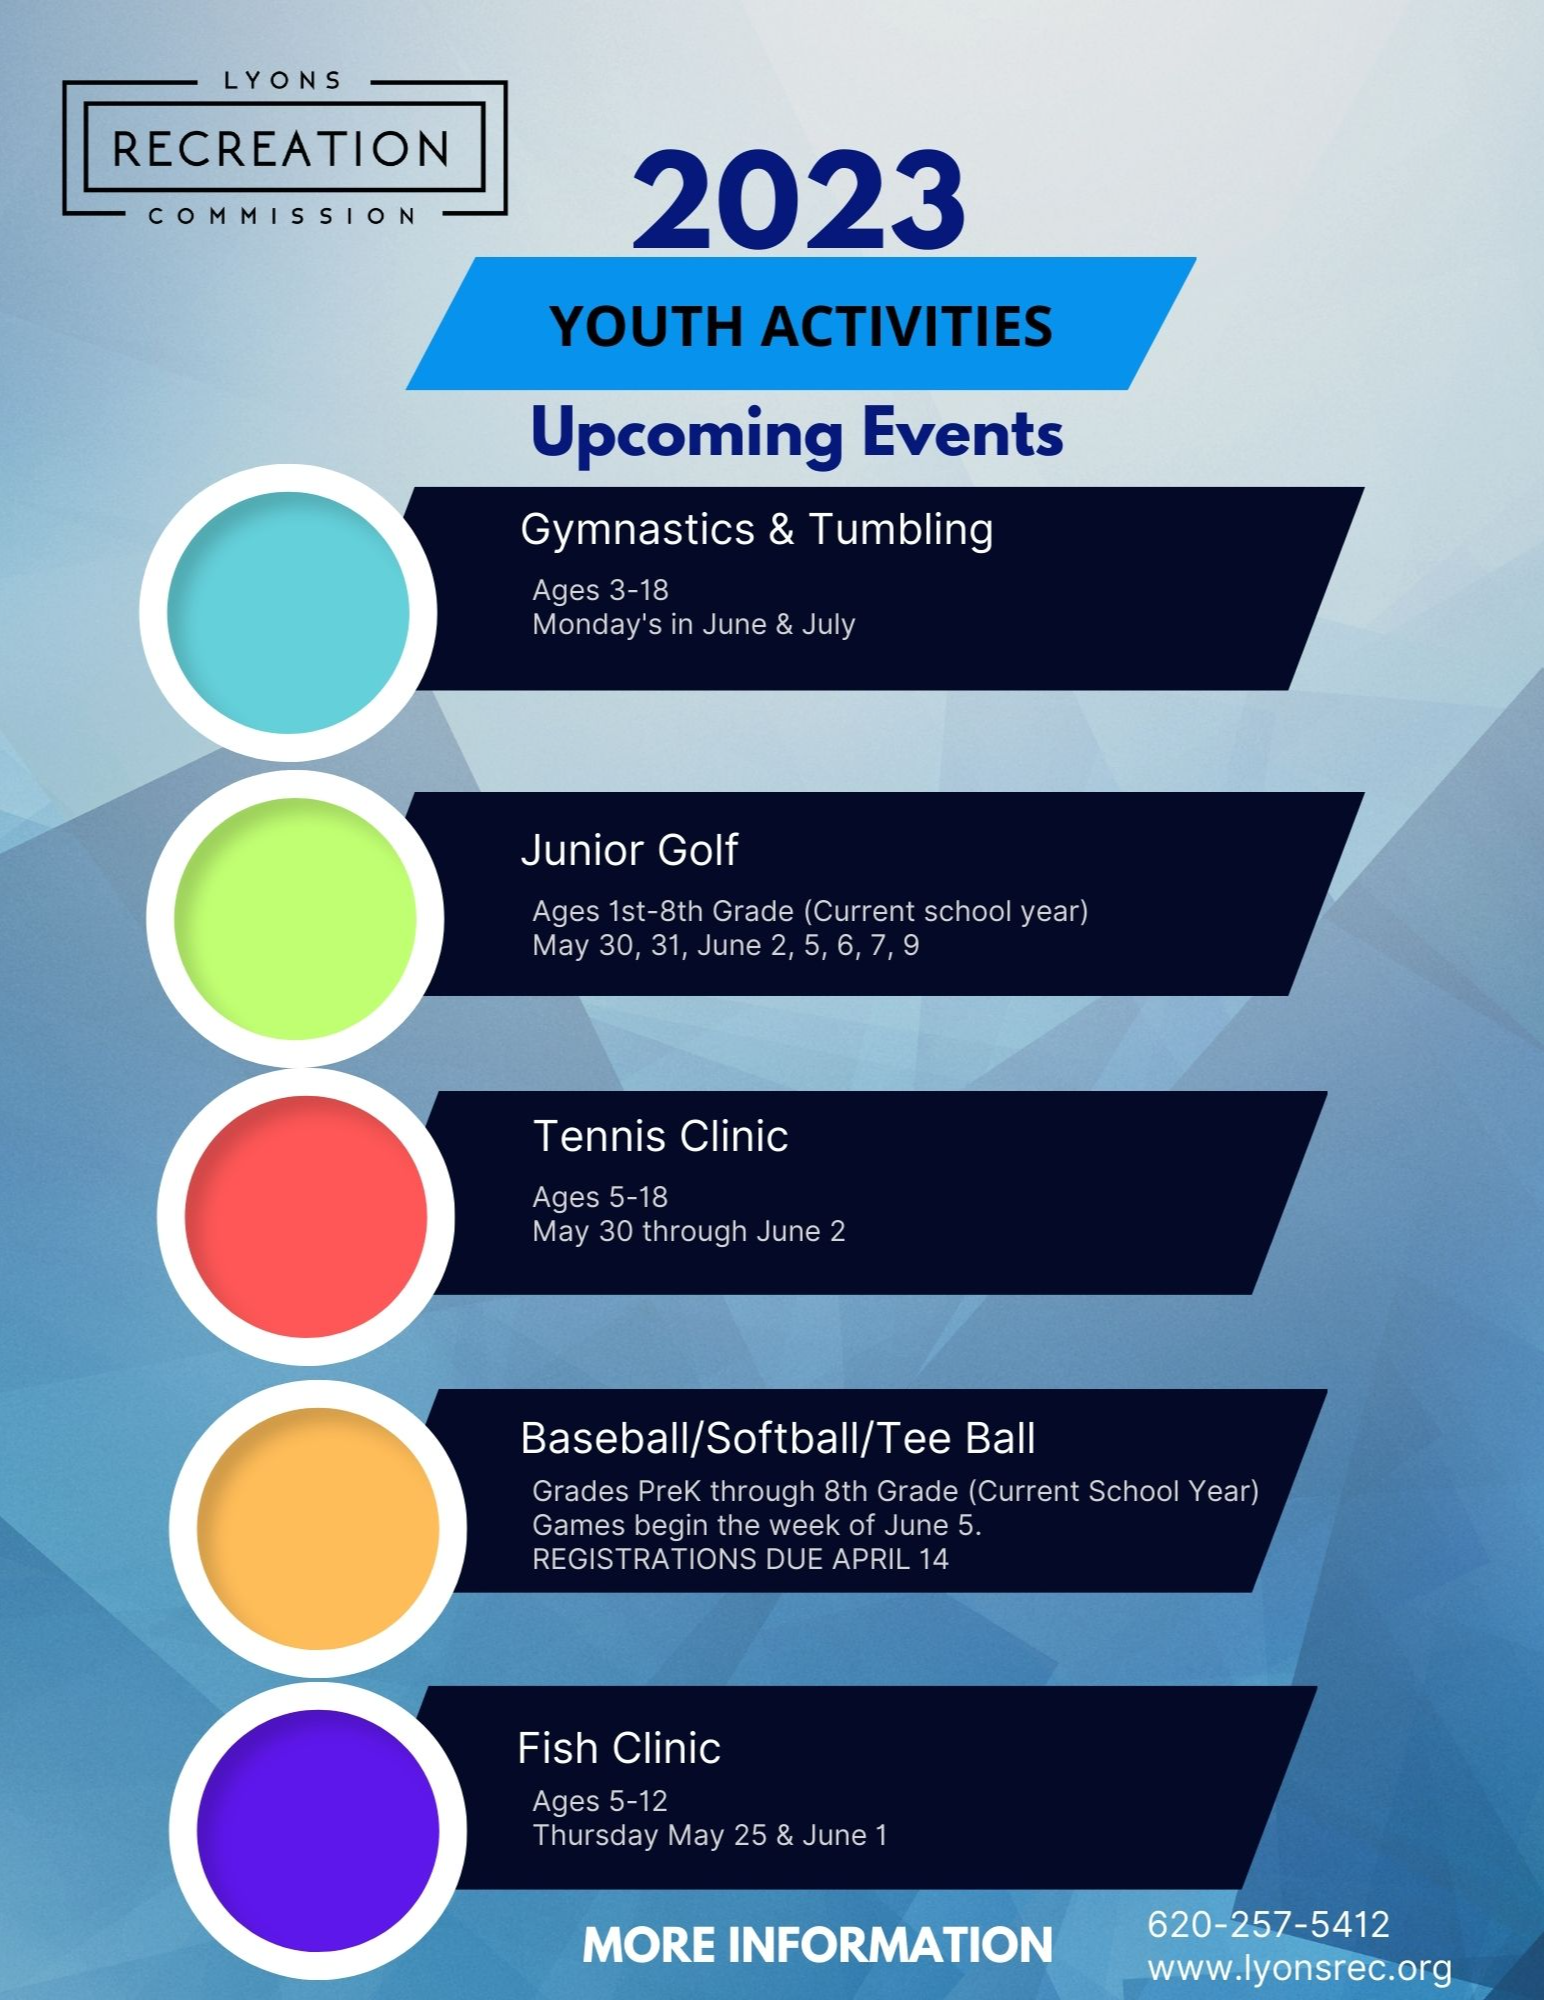 2023 youth activities upcoming events Gymnastics and Tumbling Ages 3-18 Mondays in June and July . Junior Golf- Ages 1st - 8th Grades (Current school year) May 30,31,June 2,5,6,7,9  Tennis clinic ages 5-18 May 30 through June 2   Baseball/Softball/Tee Ball Grades pre-k though 8th grades Games begin week of June 5 reg.  due Apr. 14  Fish Clinic ages 5-12 Thursday May 25 and June 1